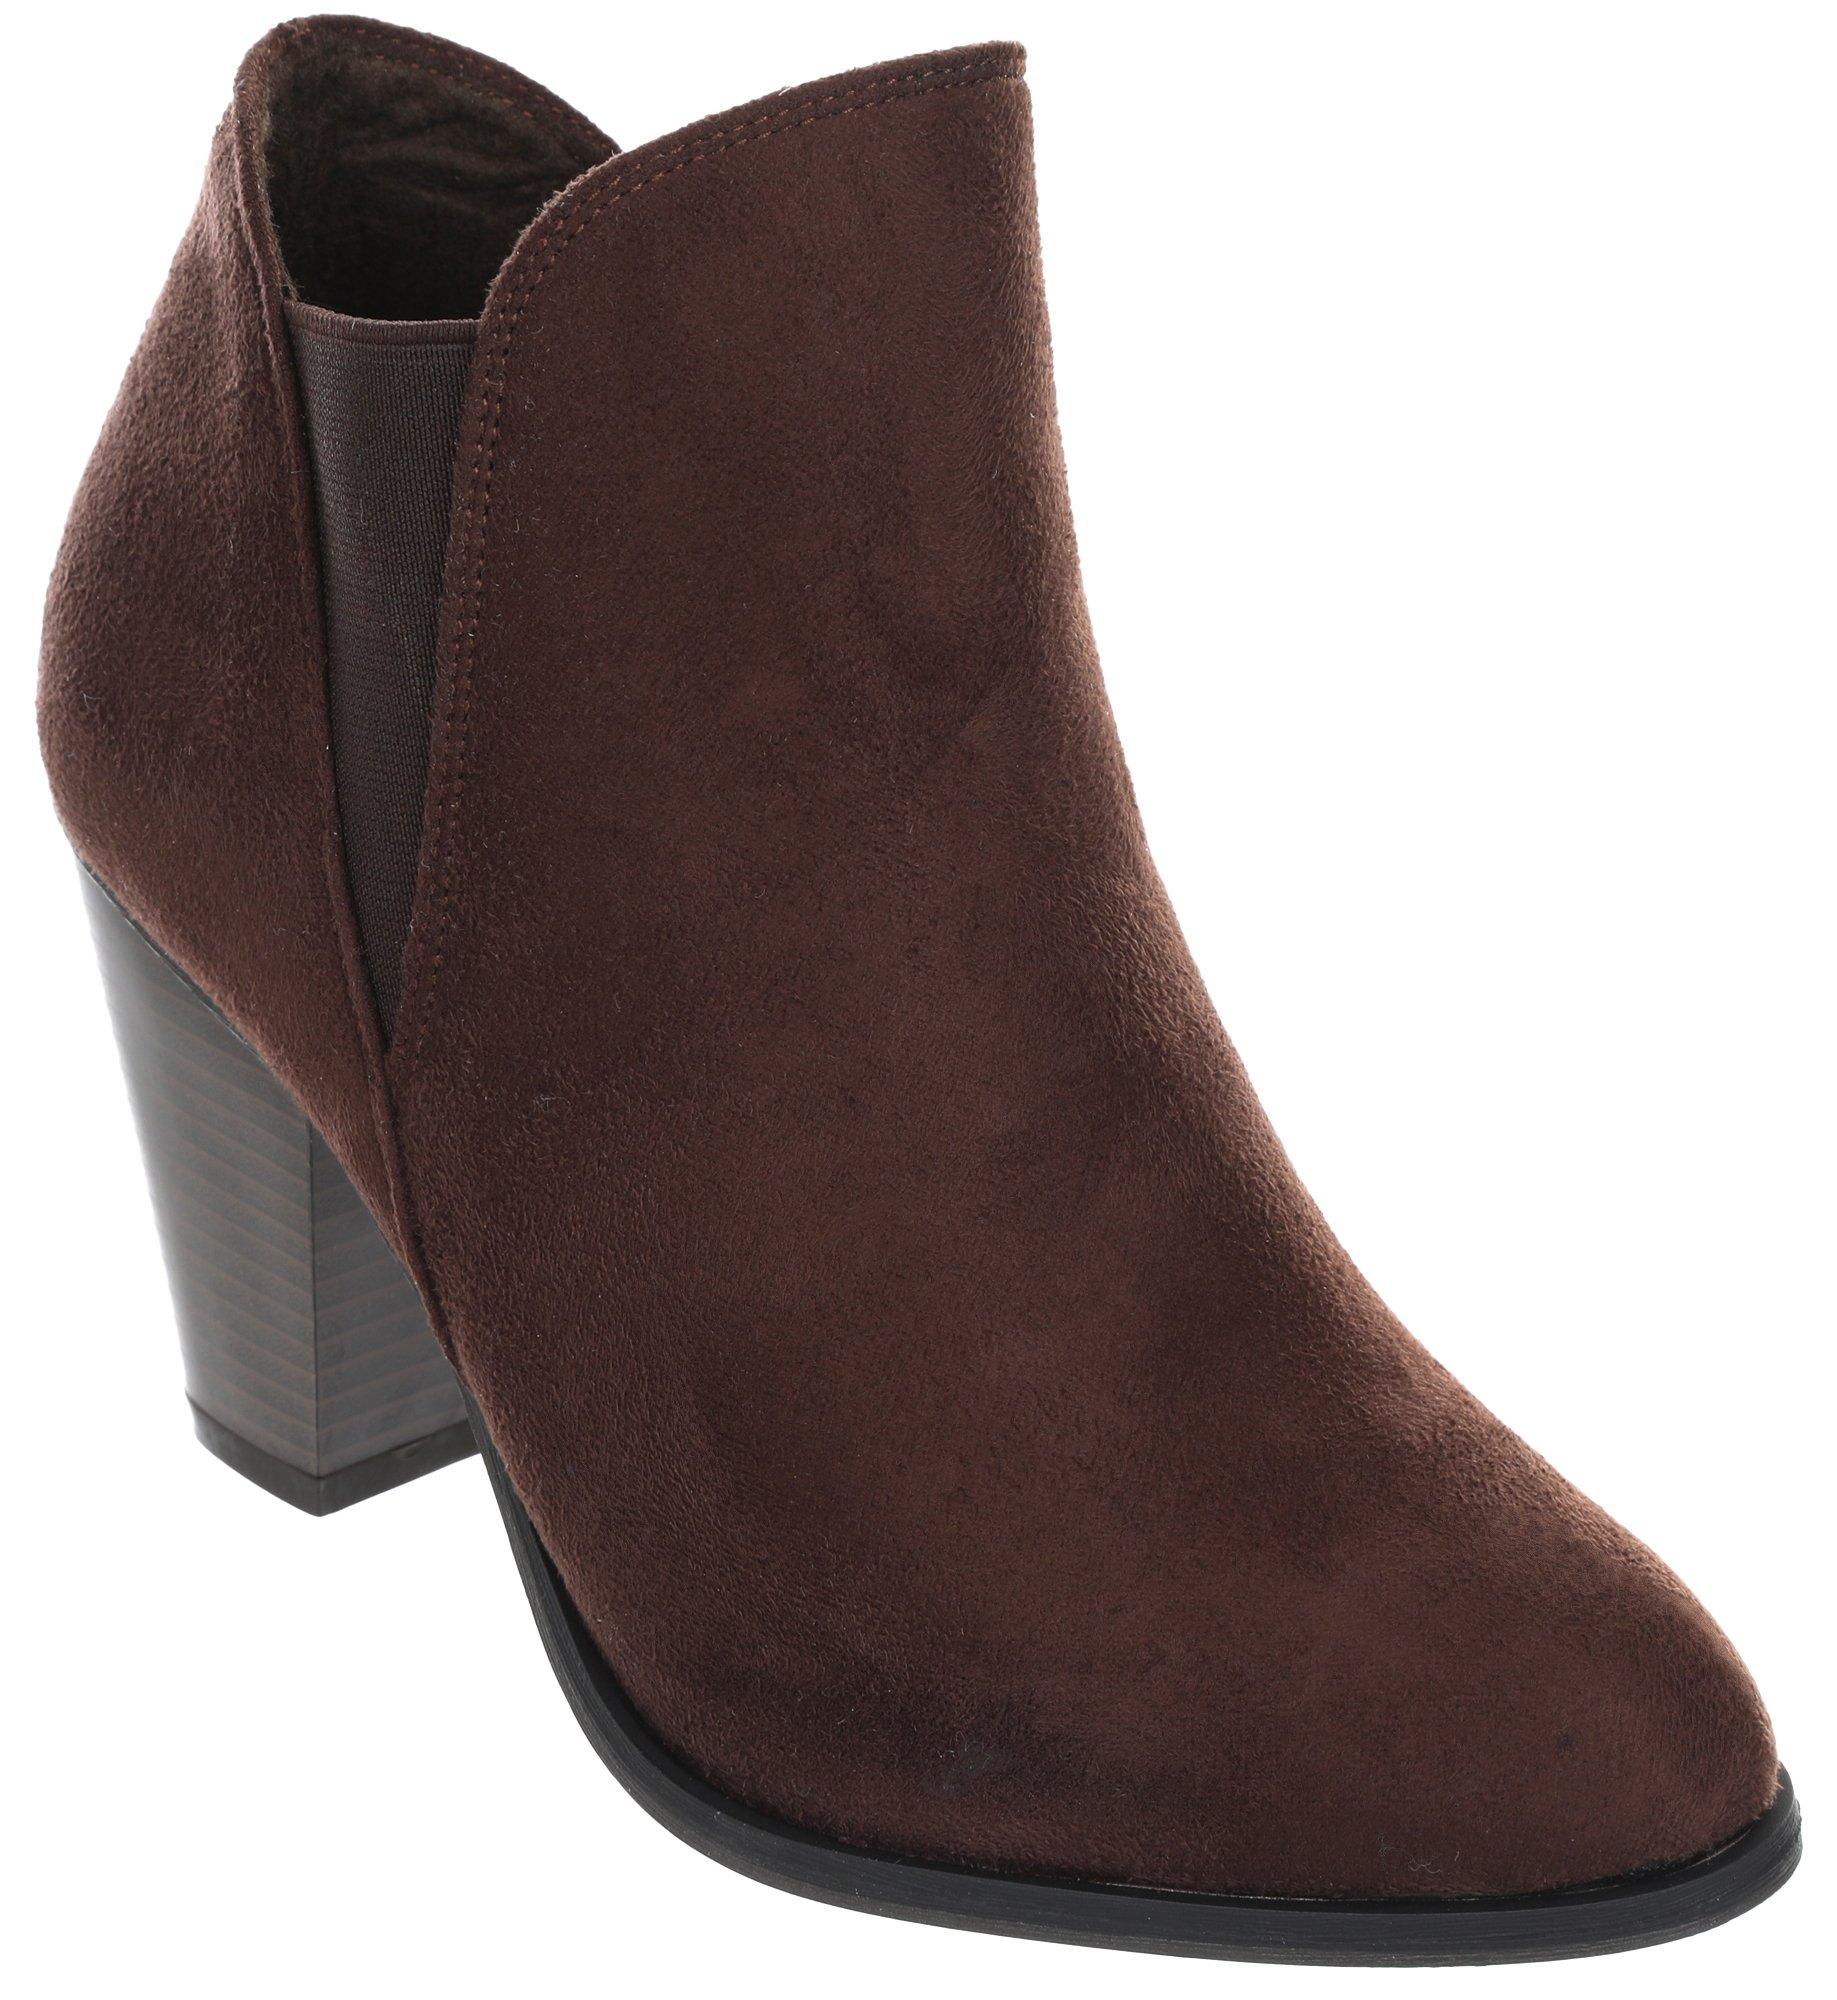 Women's Camila Ankle Booties - Brown